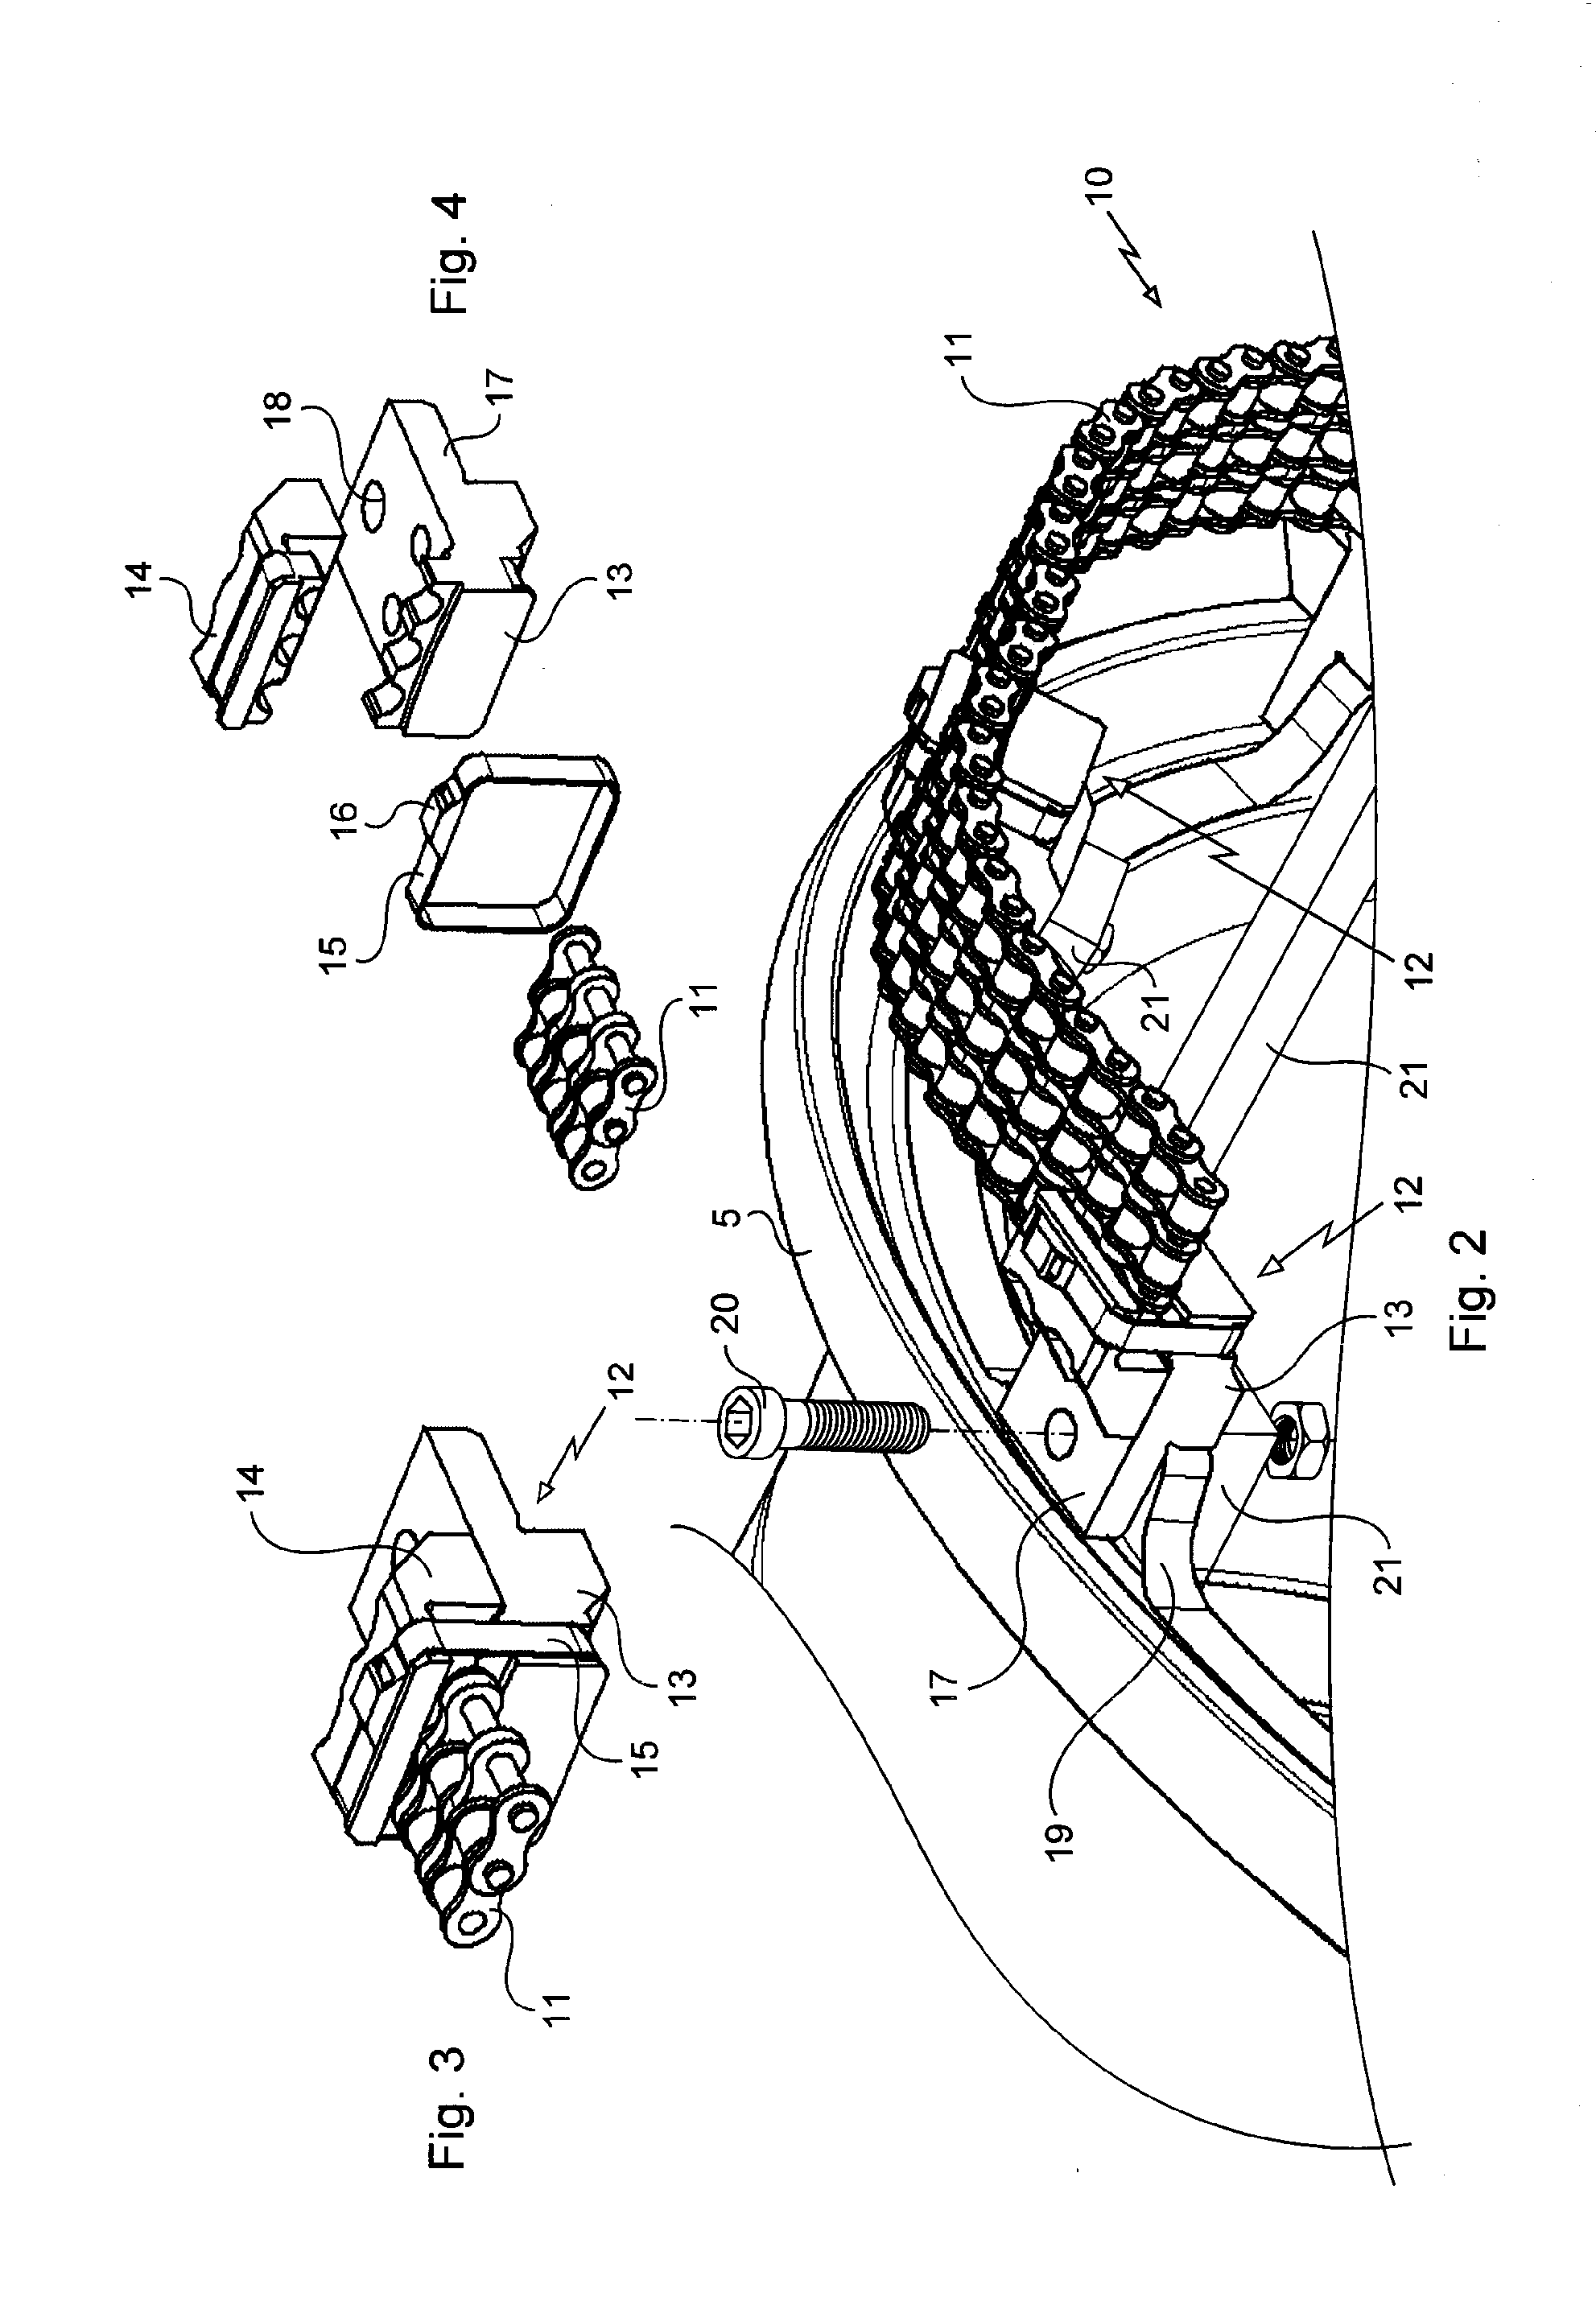 Aircraft wheel with rotational drive attached to clevises projecting from wheel rim